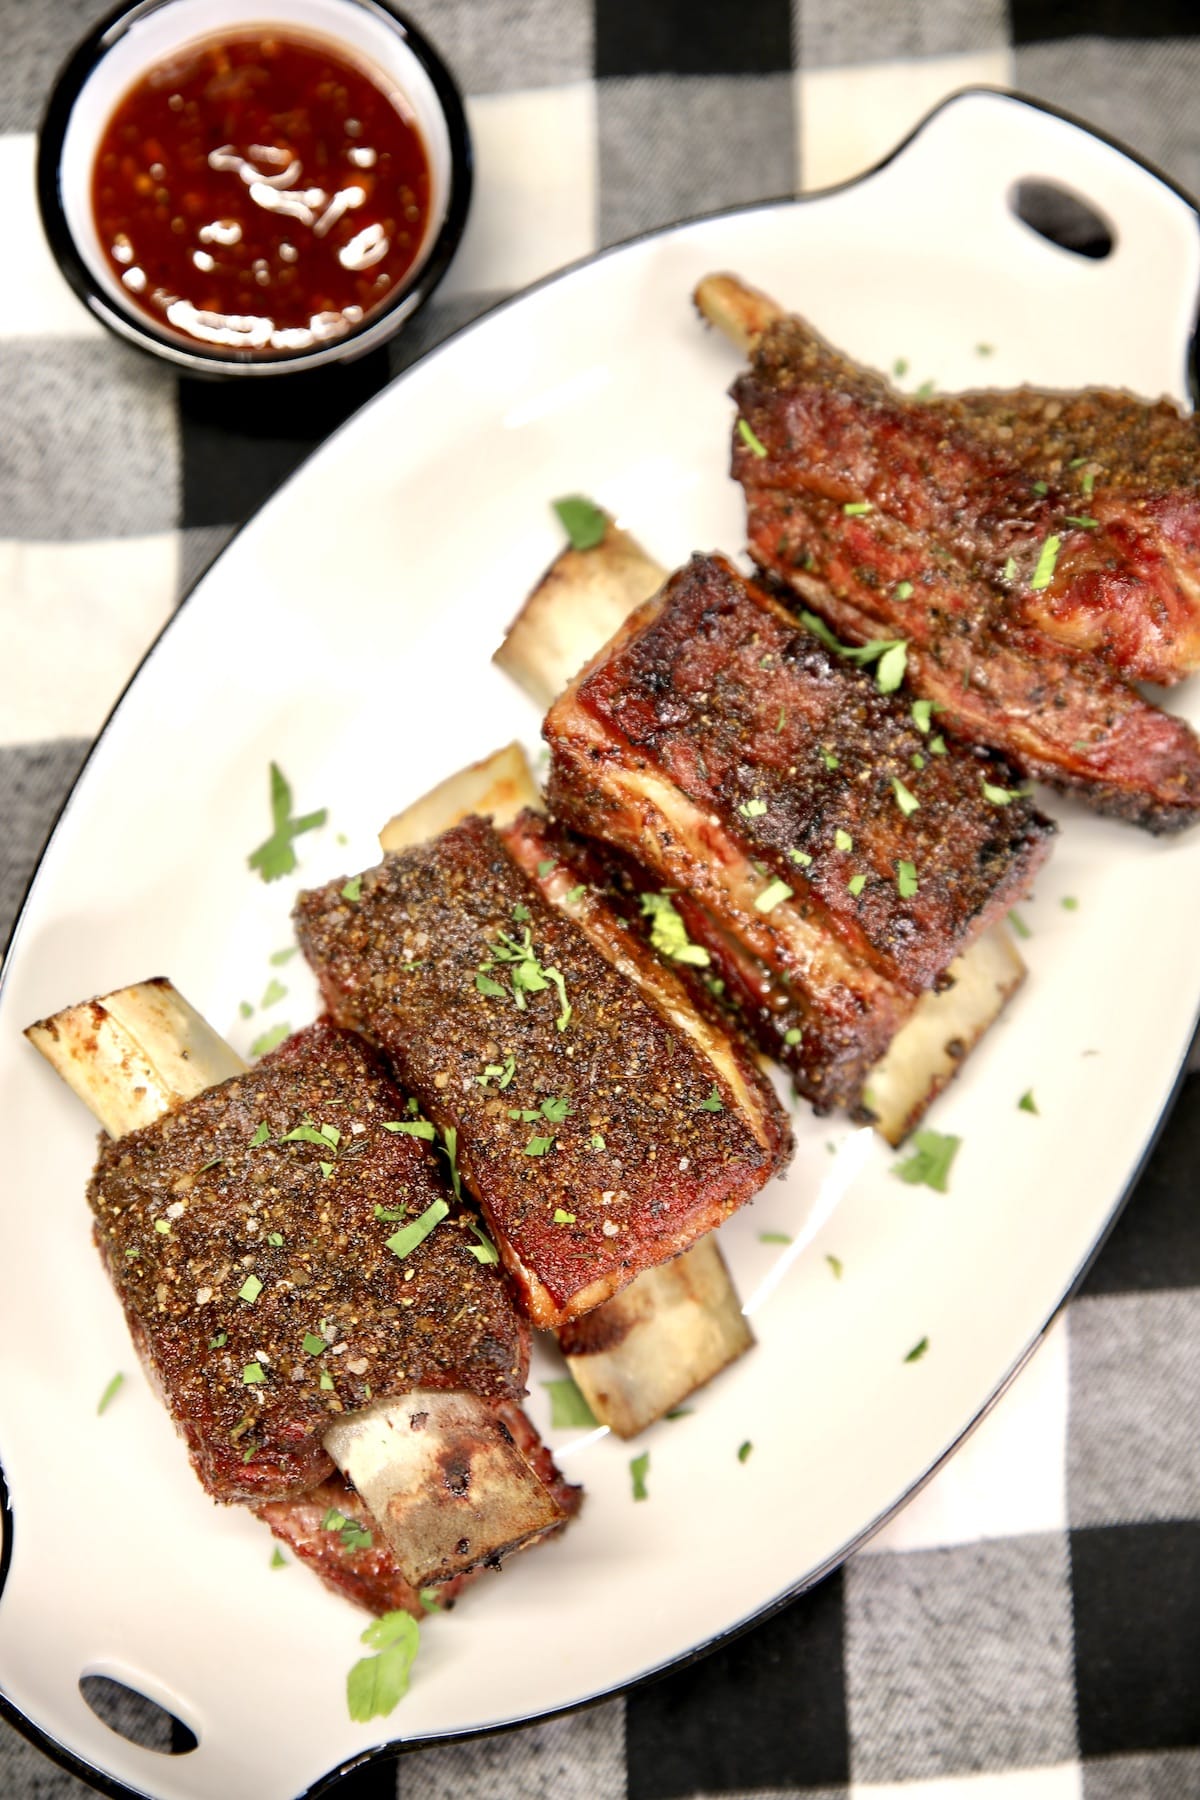 Beef ribs on a platter with bowl of bbq sauce.